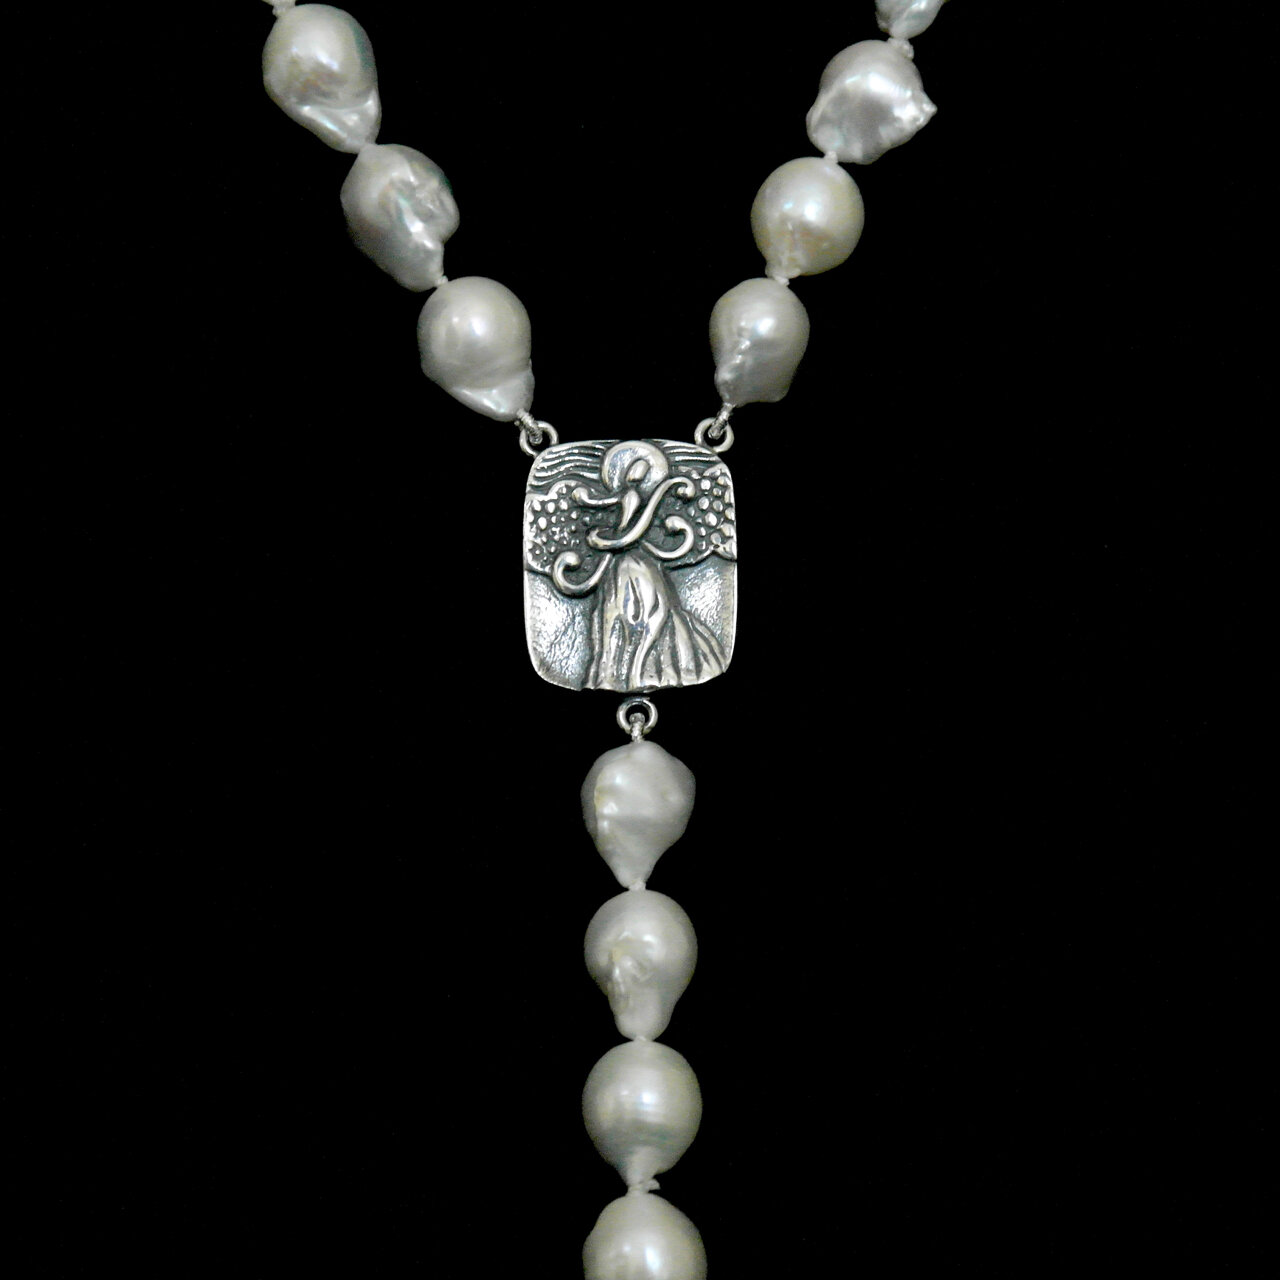 The Adobe Fine Art —Janis Loverin Earth Angels Neckwear—64-802 Baroque  Pearl Rosary Style Necklace